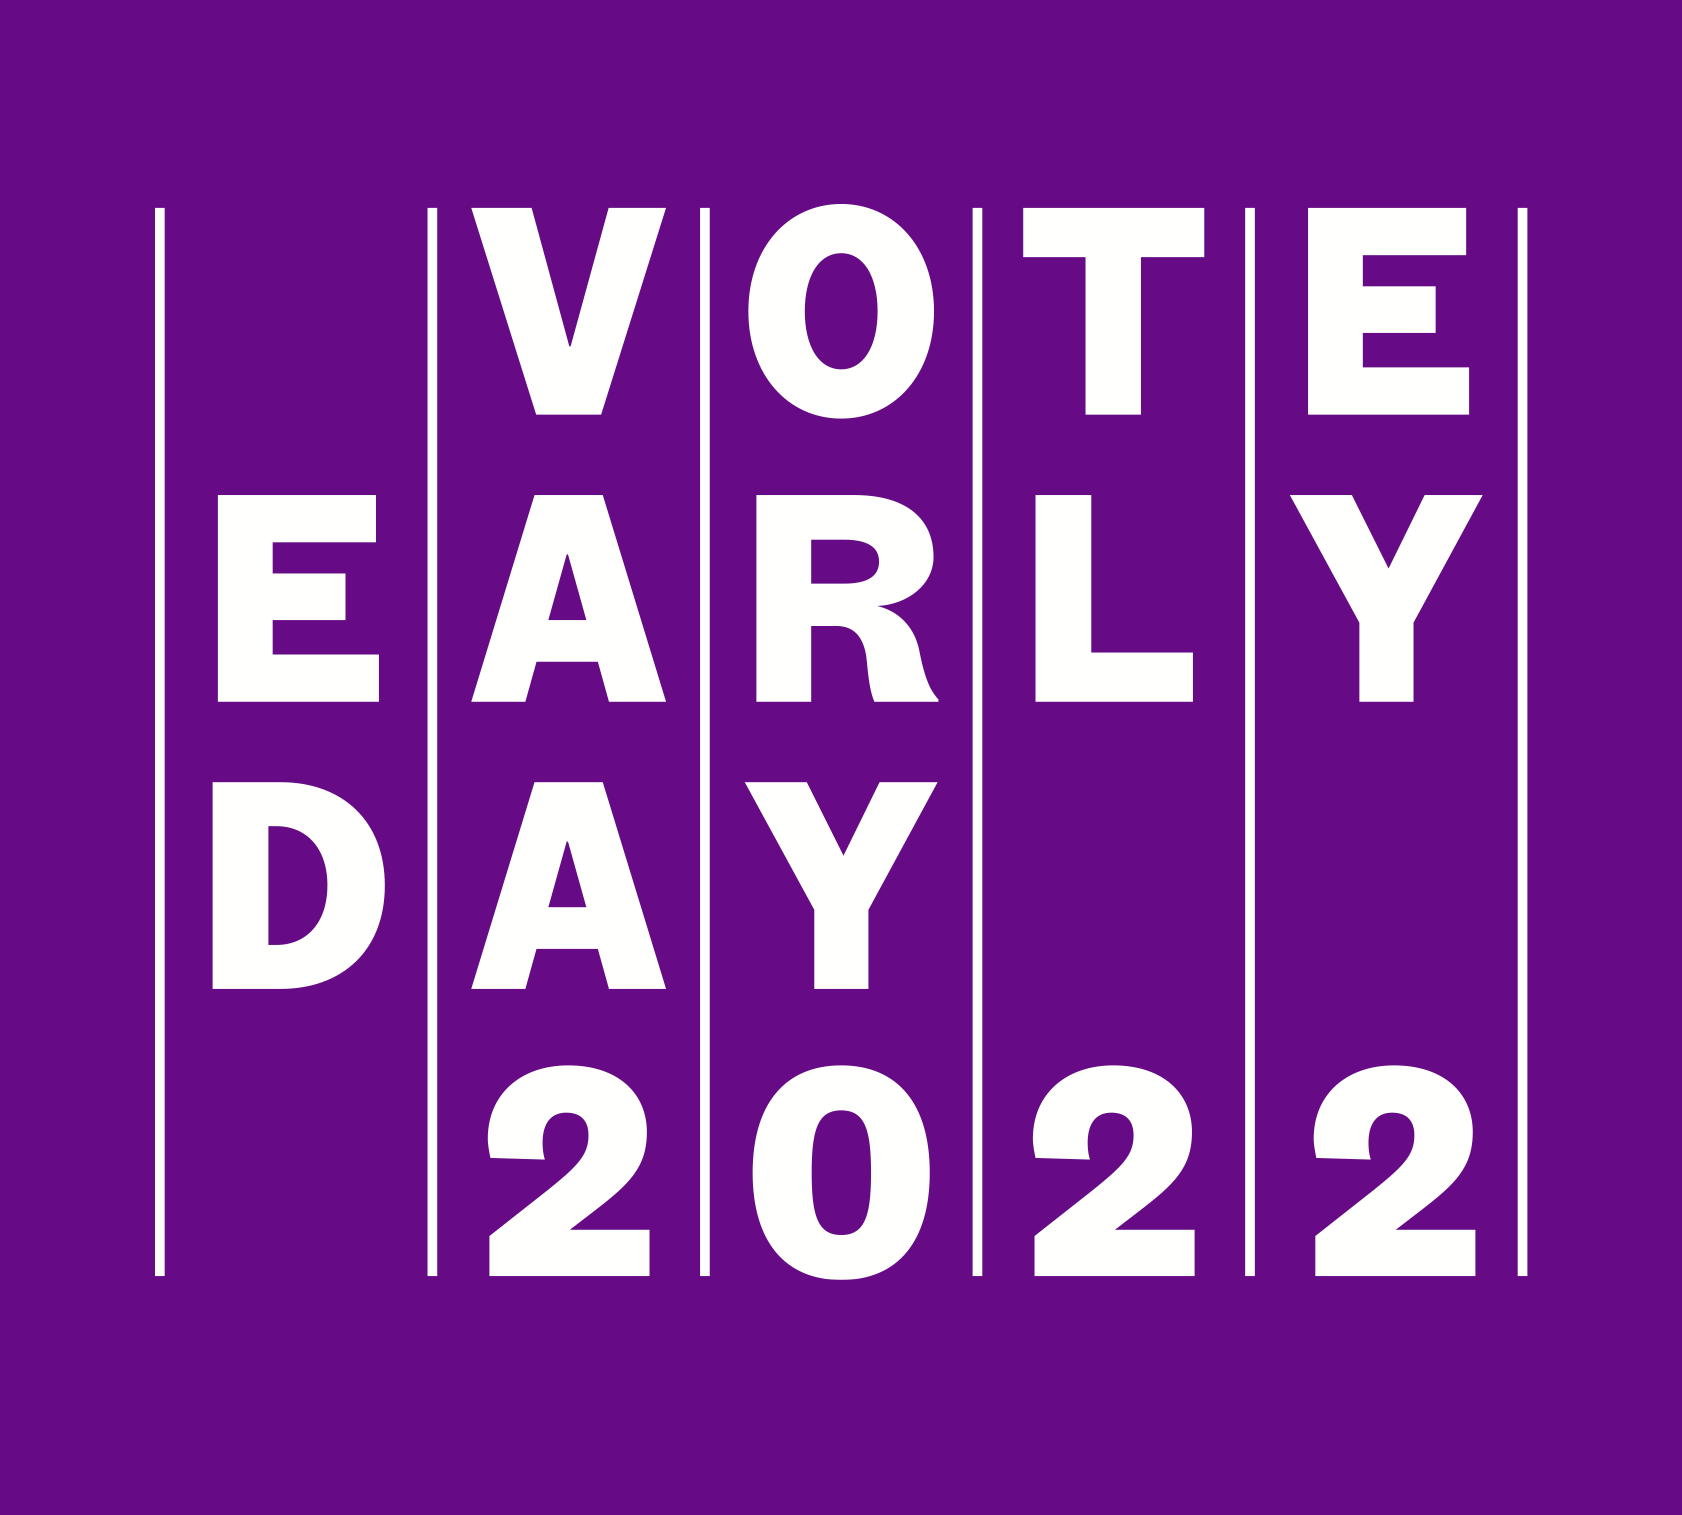 Vote Early Day 2022